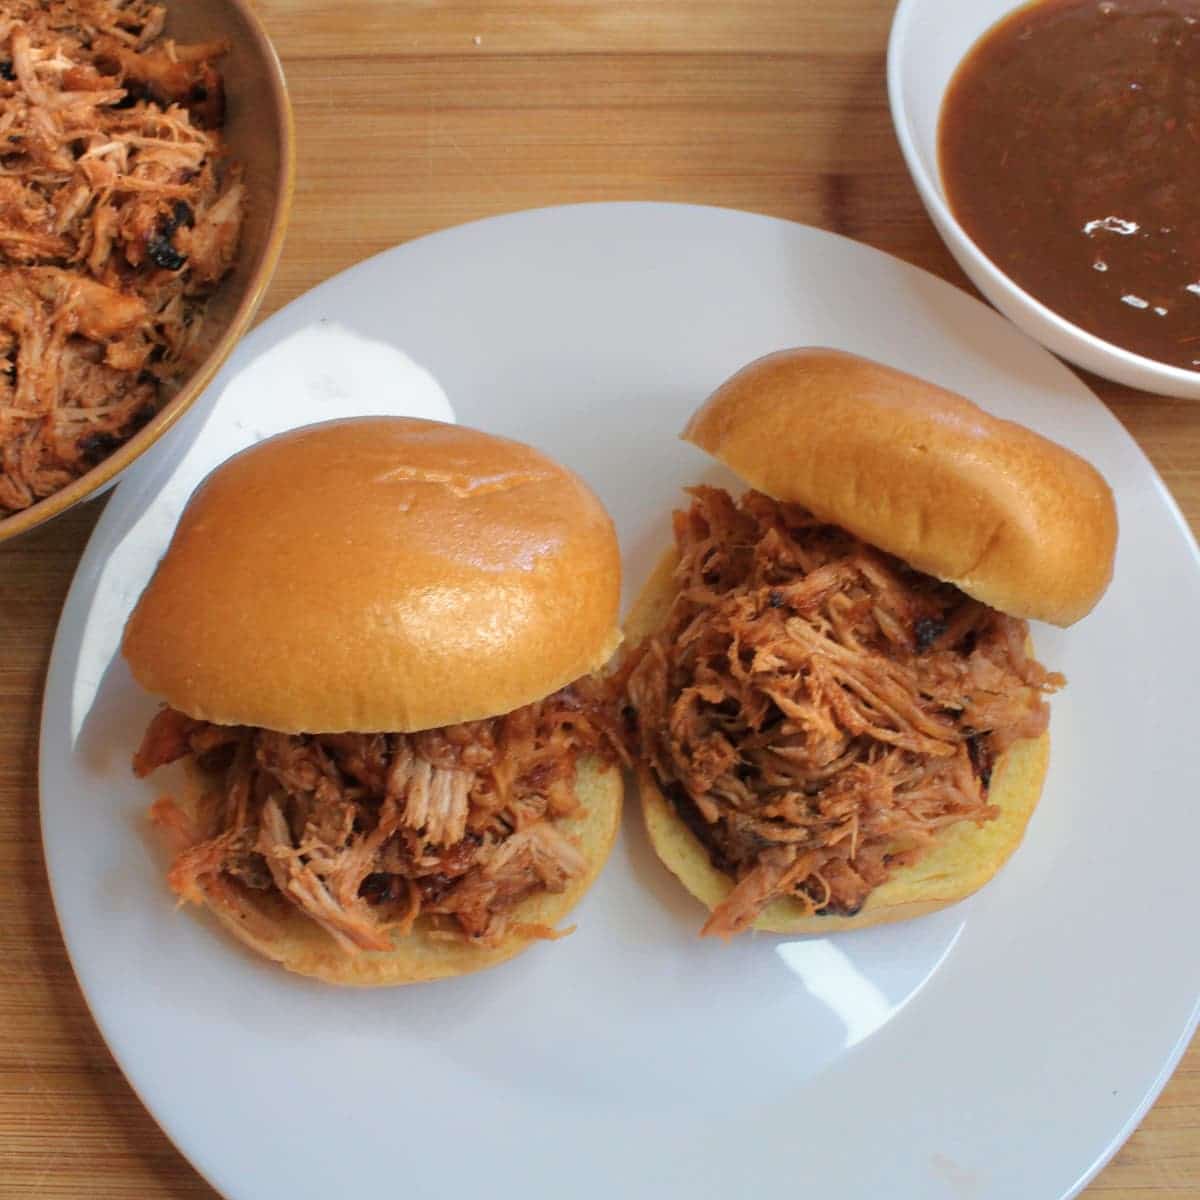 barbecue pulled pork sandwiches with bowls of pulled pork and barbecue sauce near. The pulled pork recipe is from cleveland cooking.